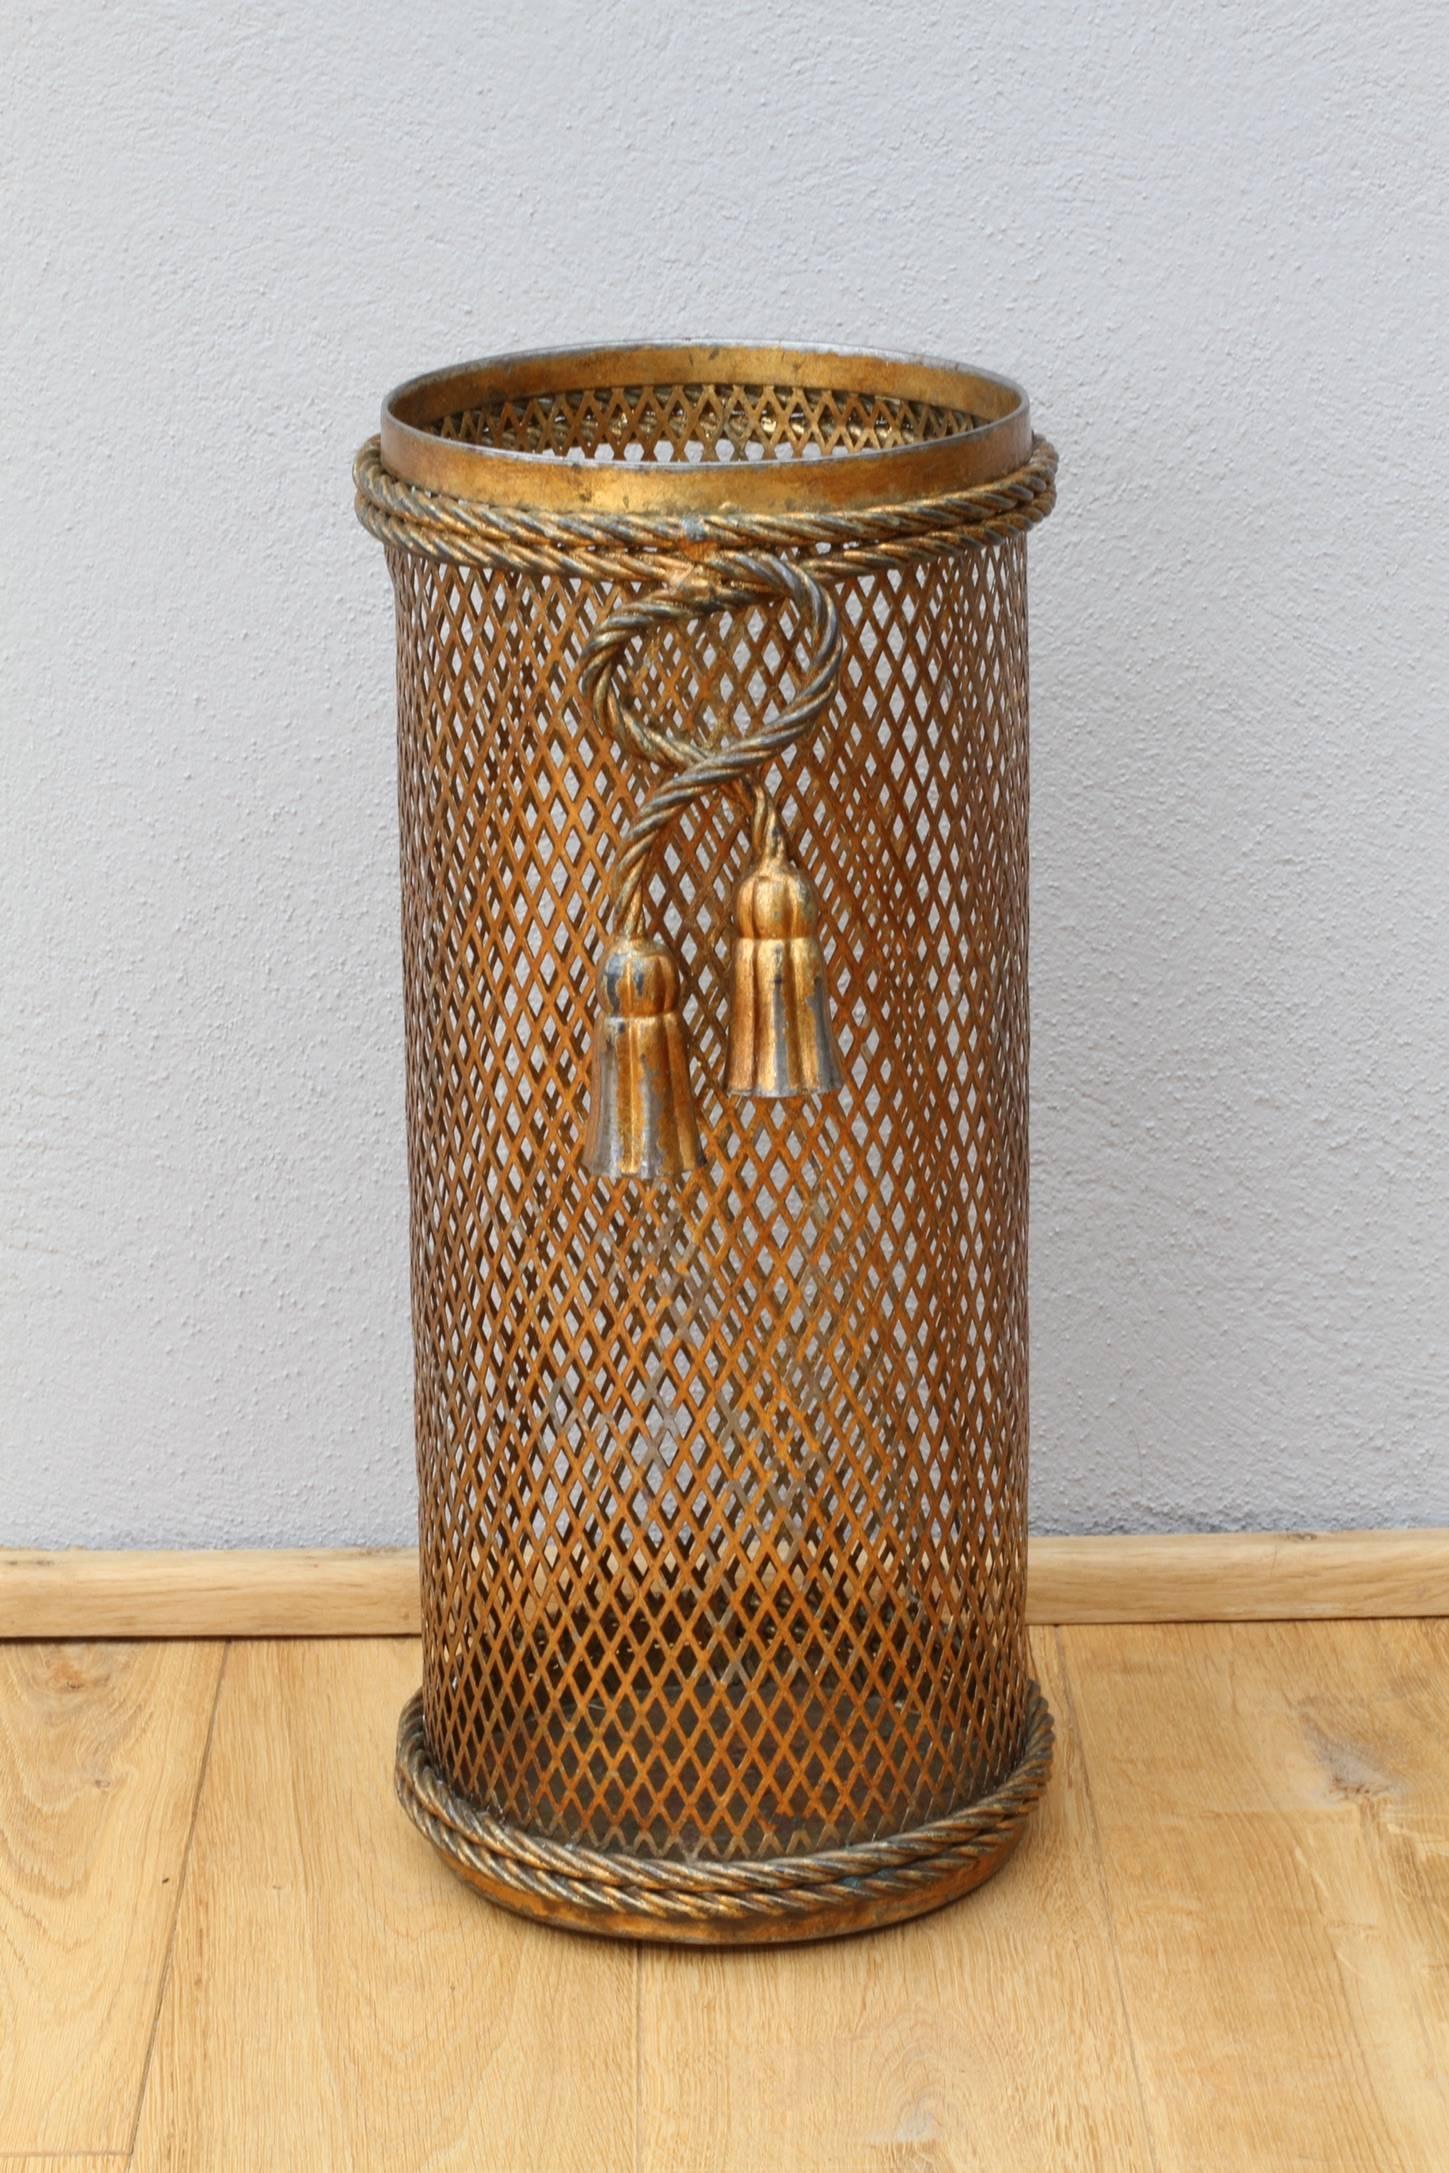 Stunning Mid-Century gold / gilt / gilded Hollywood Regency style umbrella stand / holder made in Florence, Italy, circa 1950 by Li Puma Firenze. The perforated lattice patterned metalwork with bent rope and tassel details finishes the piece